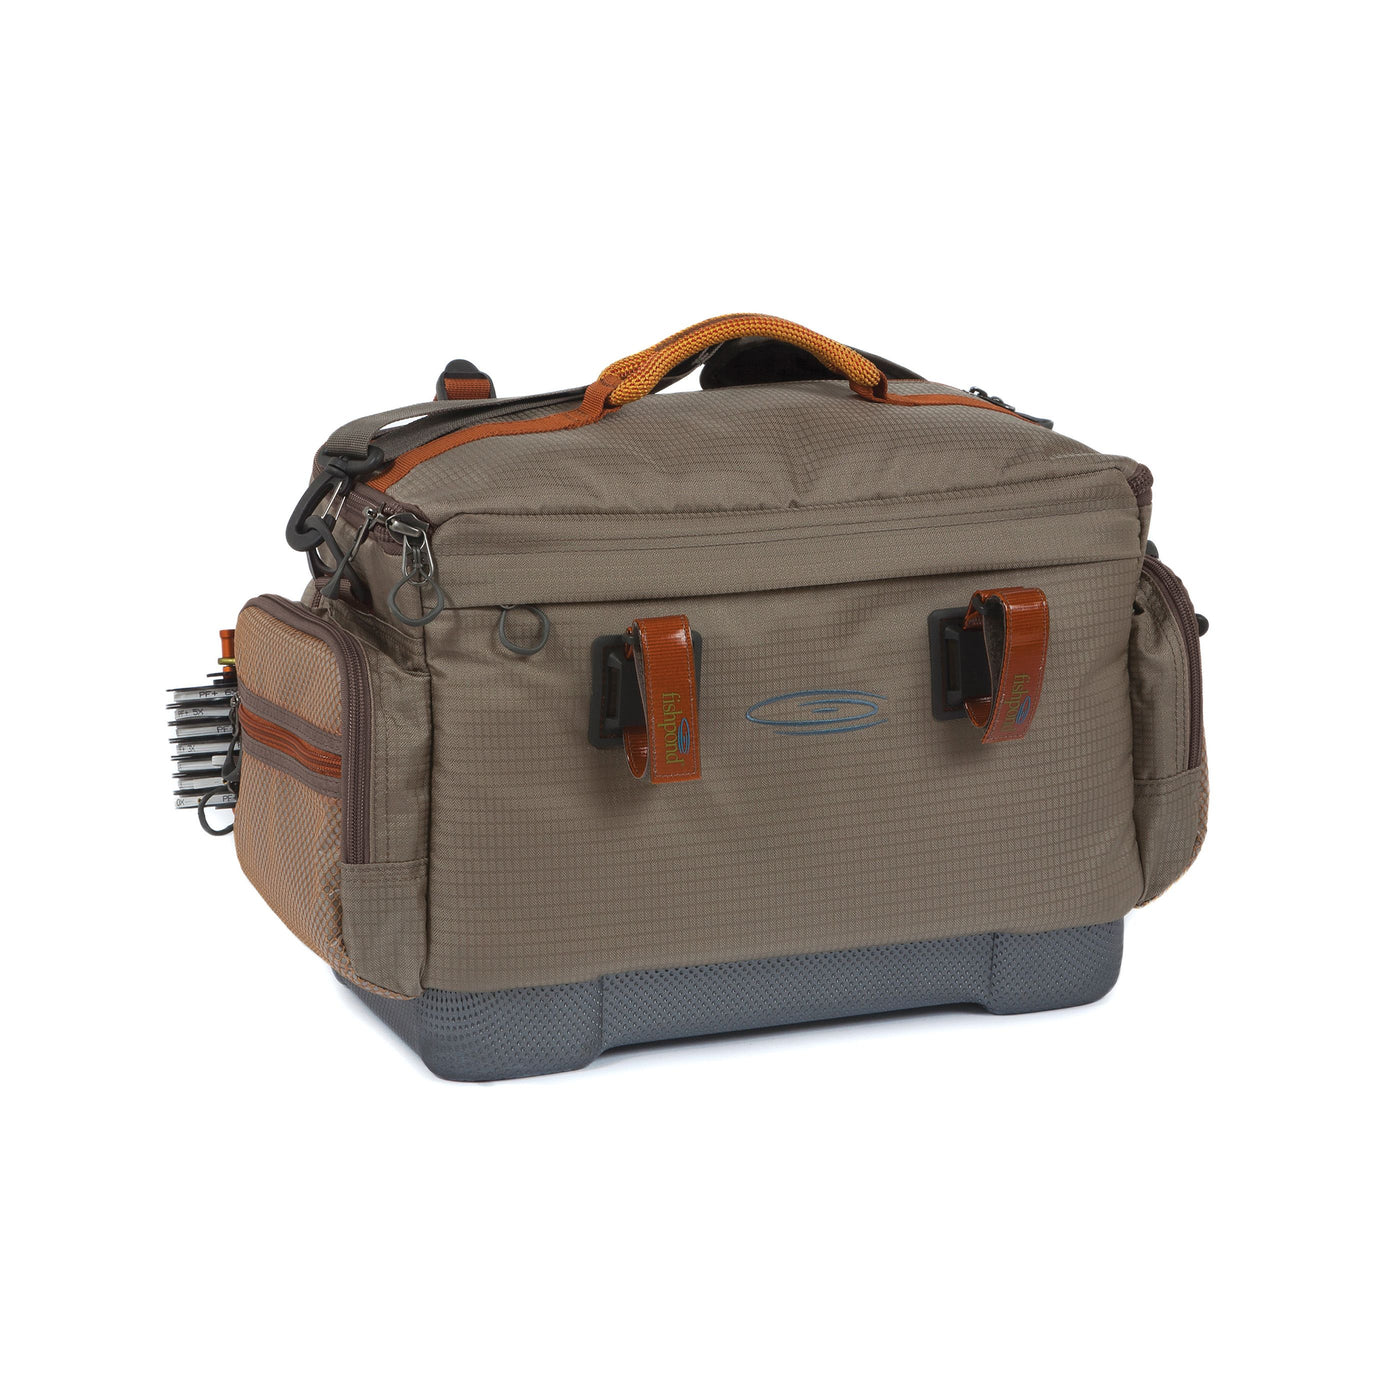 Fly Fishing Gear Bags for Sale